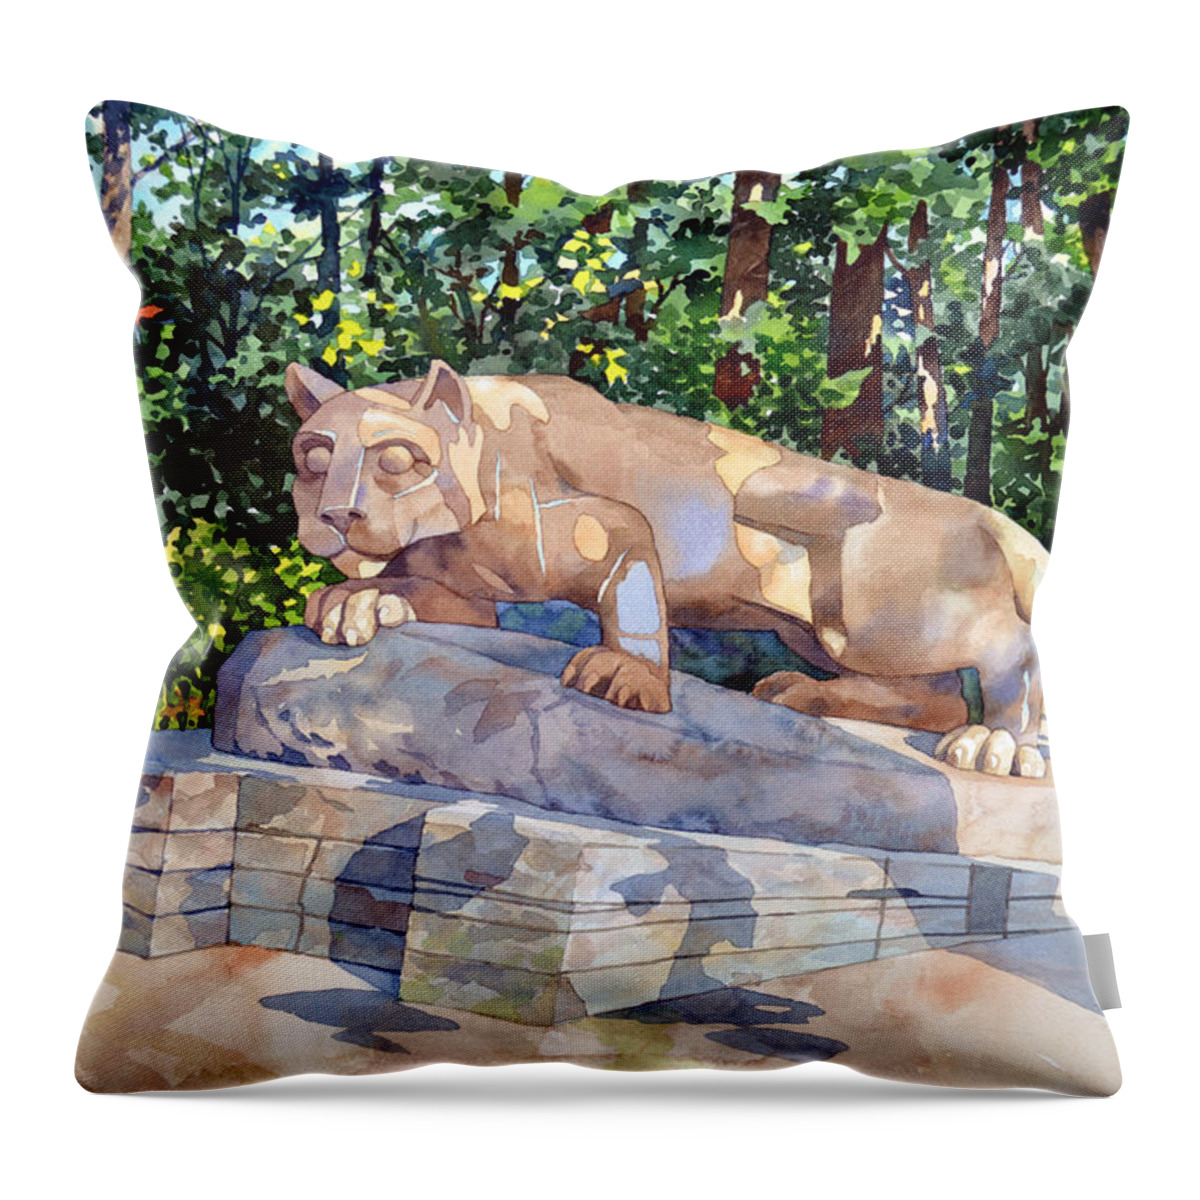 #pennstate #nittanylion #statecollege #watercolor #landscape #fineart #commissionedart Throw Pillow featuring the painting The Nittany Lion by Mick Williams